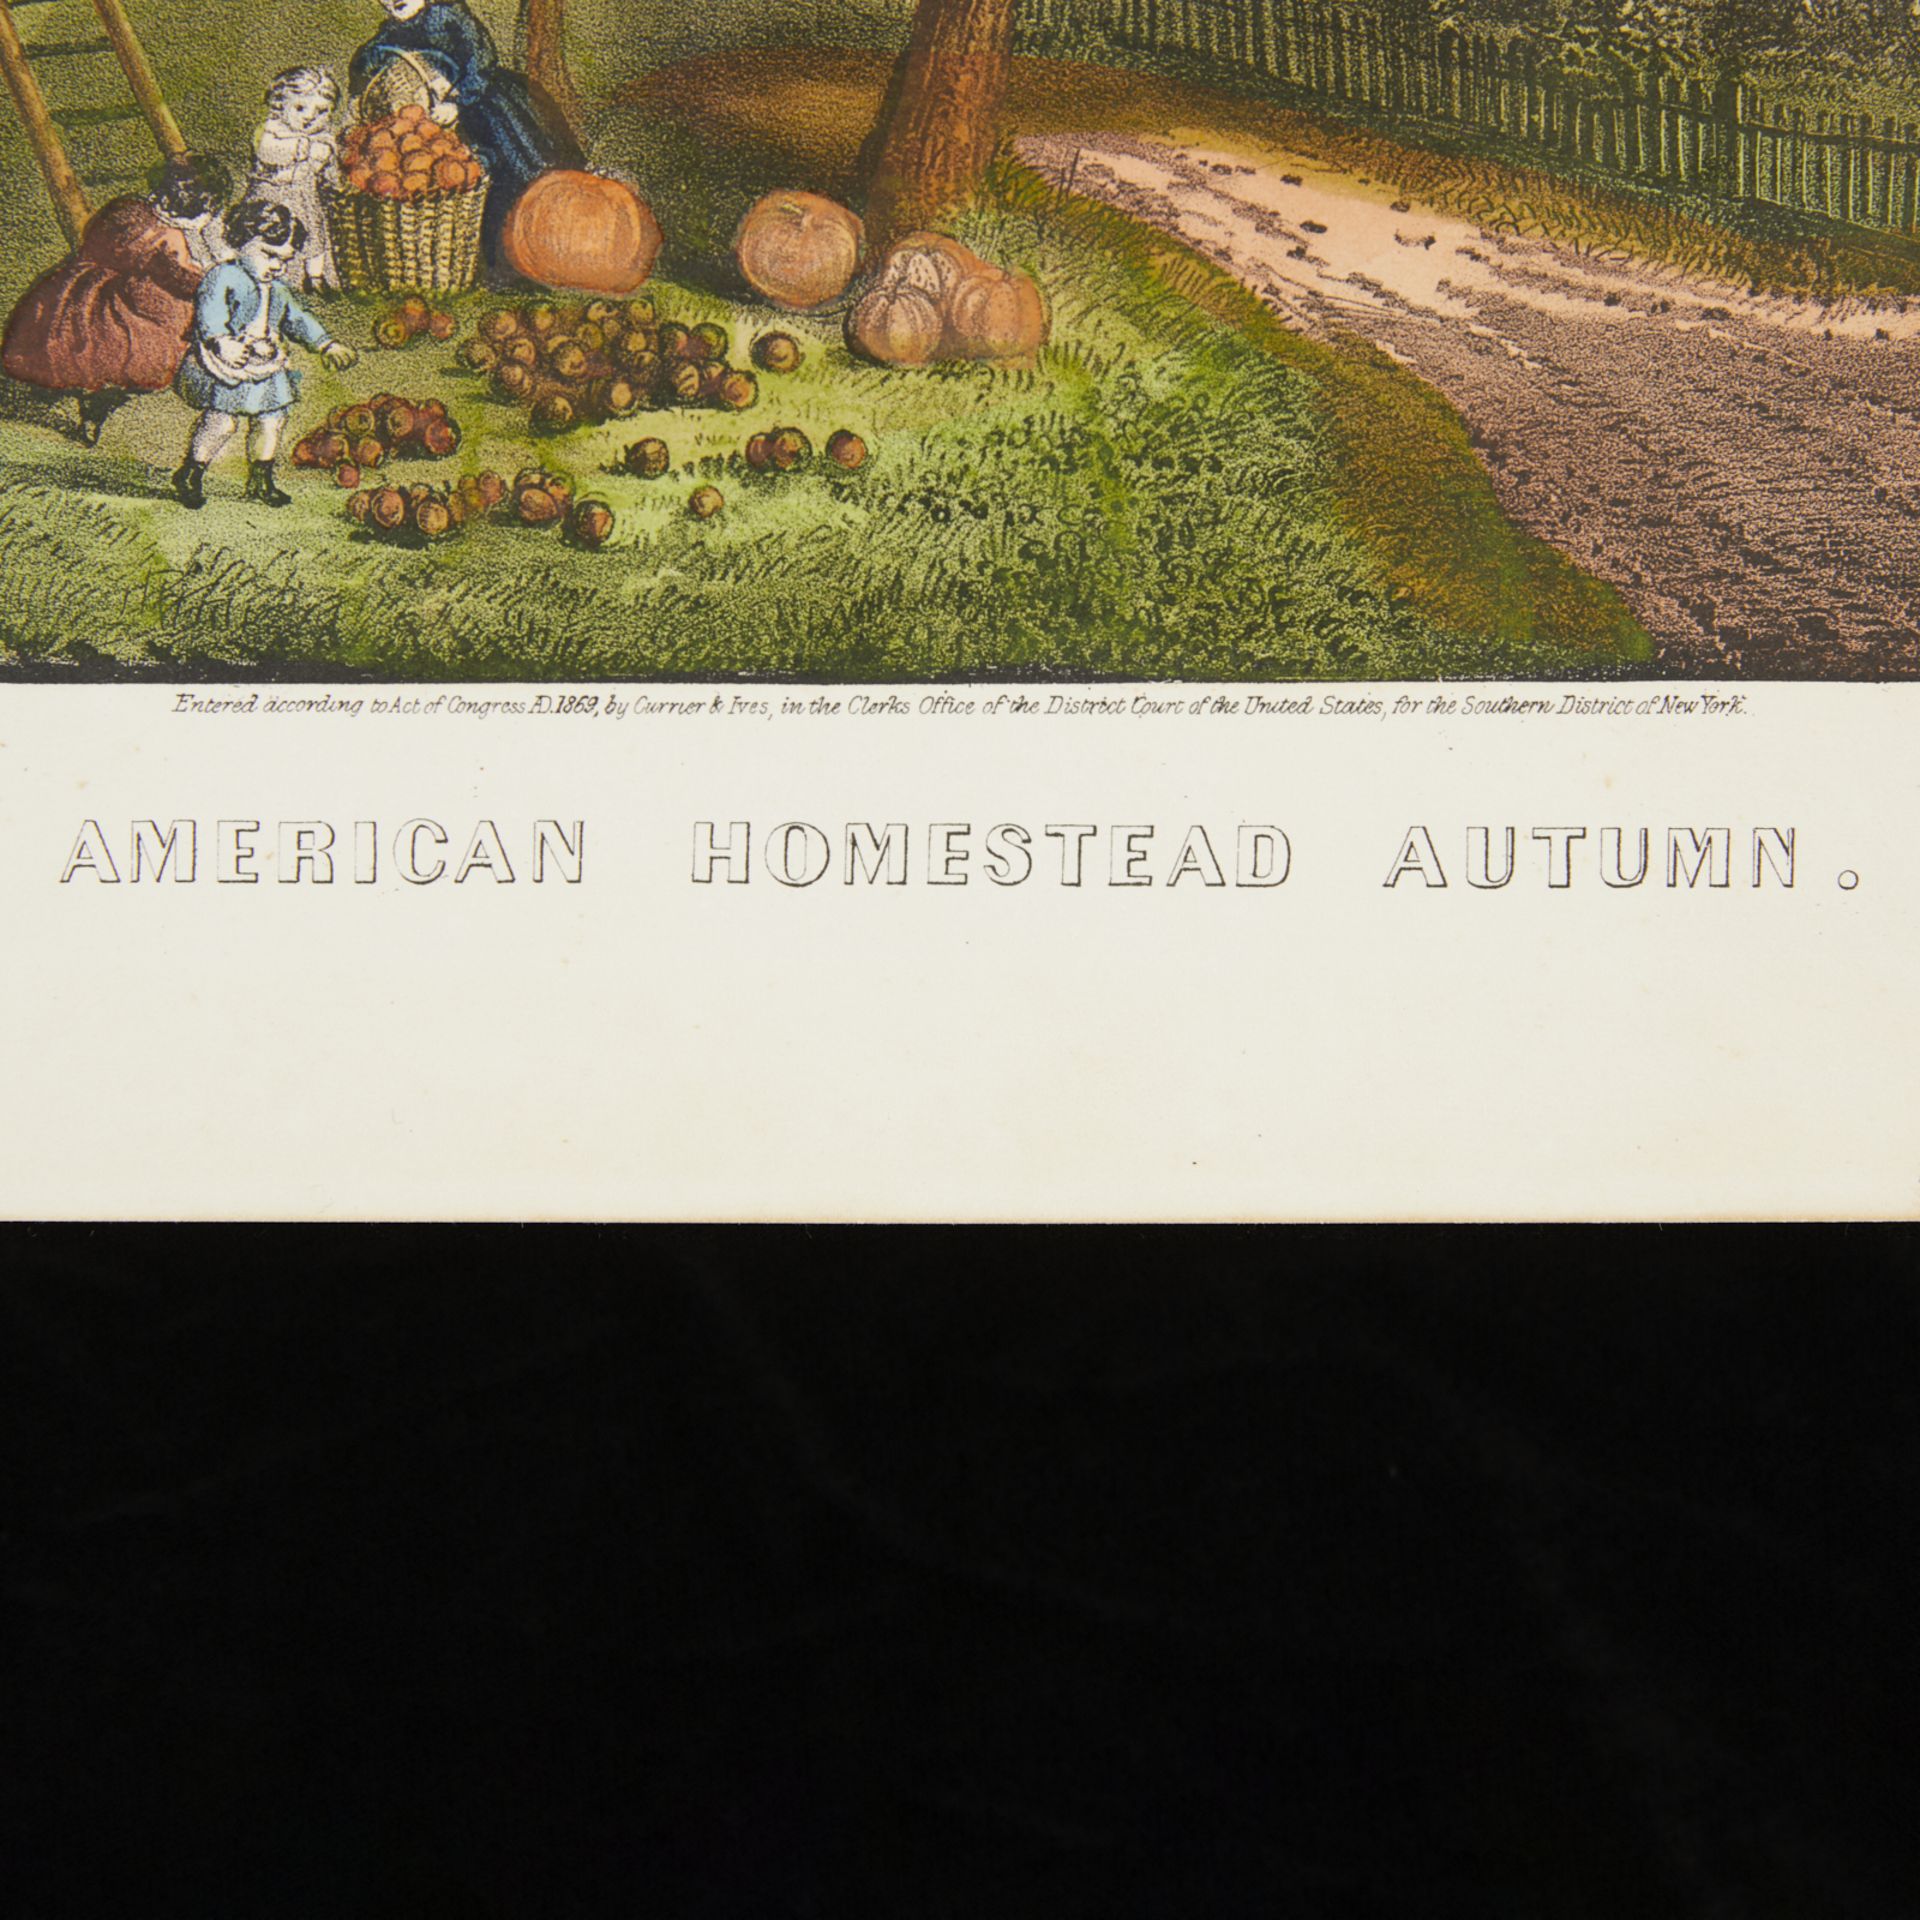 Currier & Ives "American Homestead Autumn" 1869 - Image 2 of 8